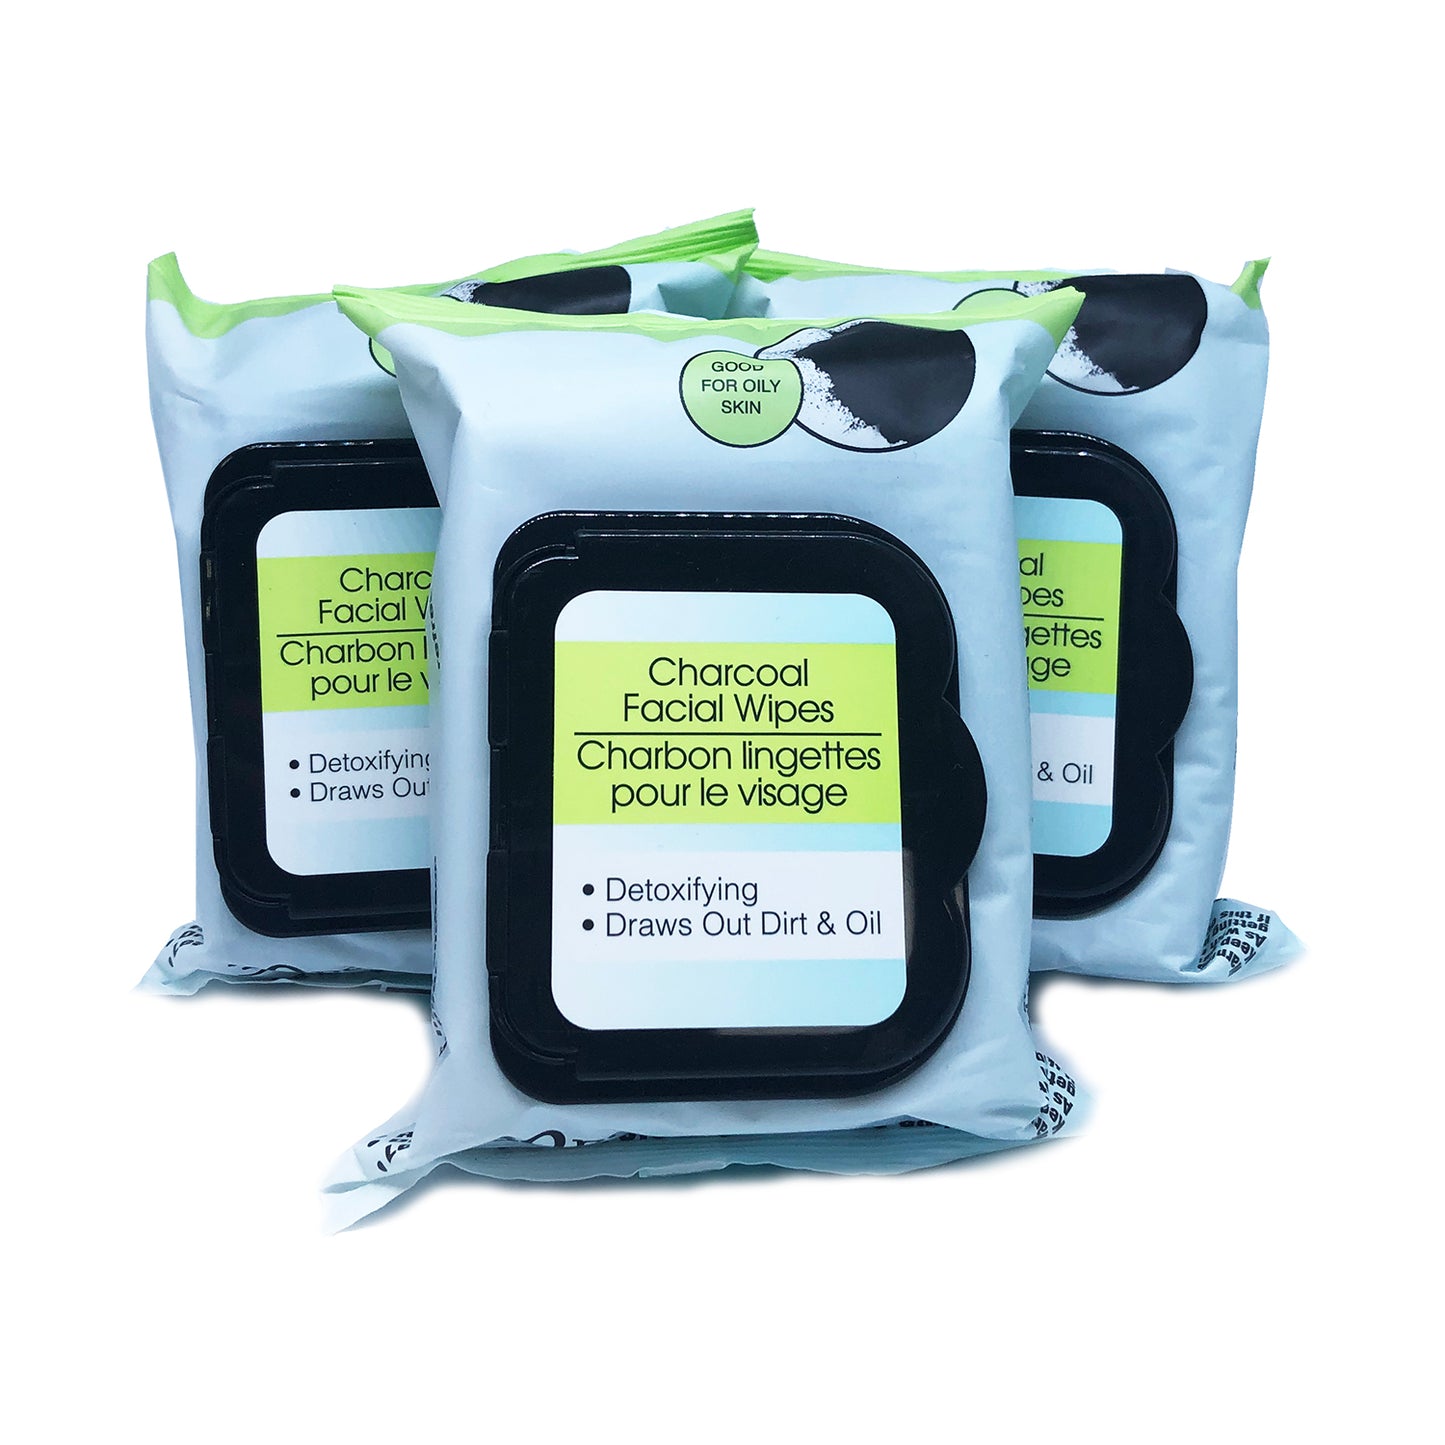 Charcoal Facial Wipes 30 ct "3-PACK"